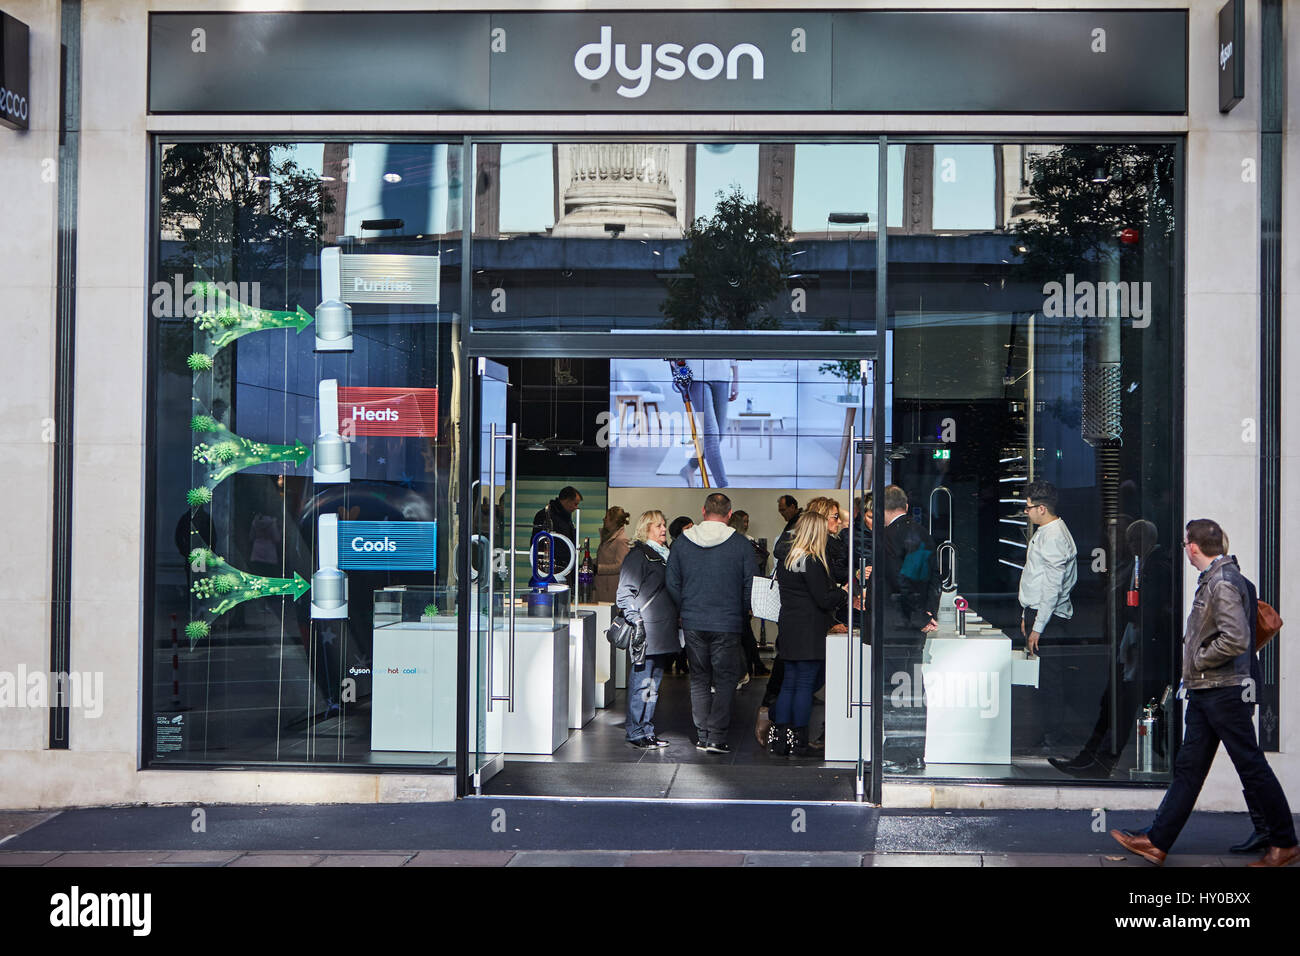 Dyson Store High Resolution Stock Photography and Images - Alamy